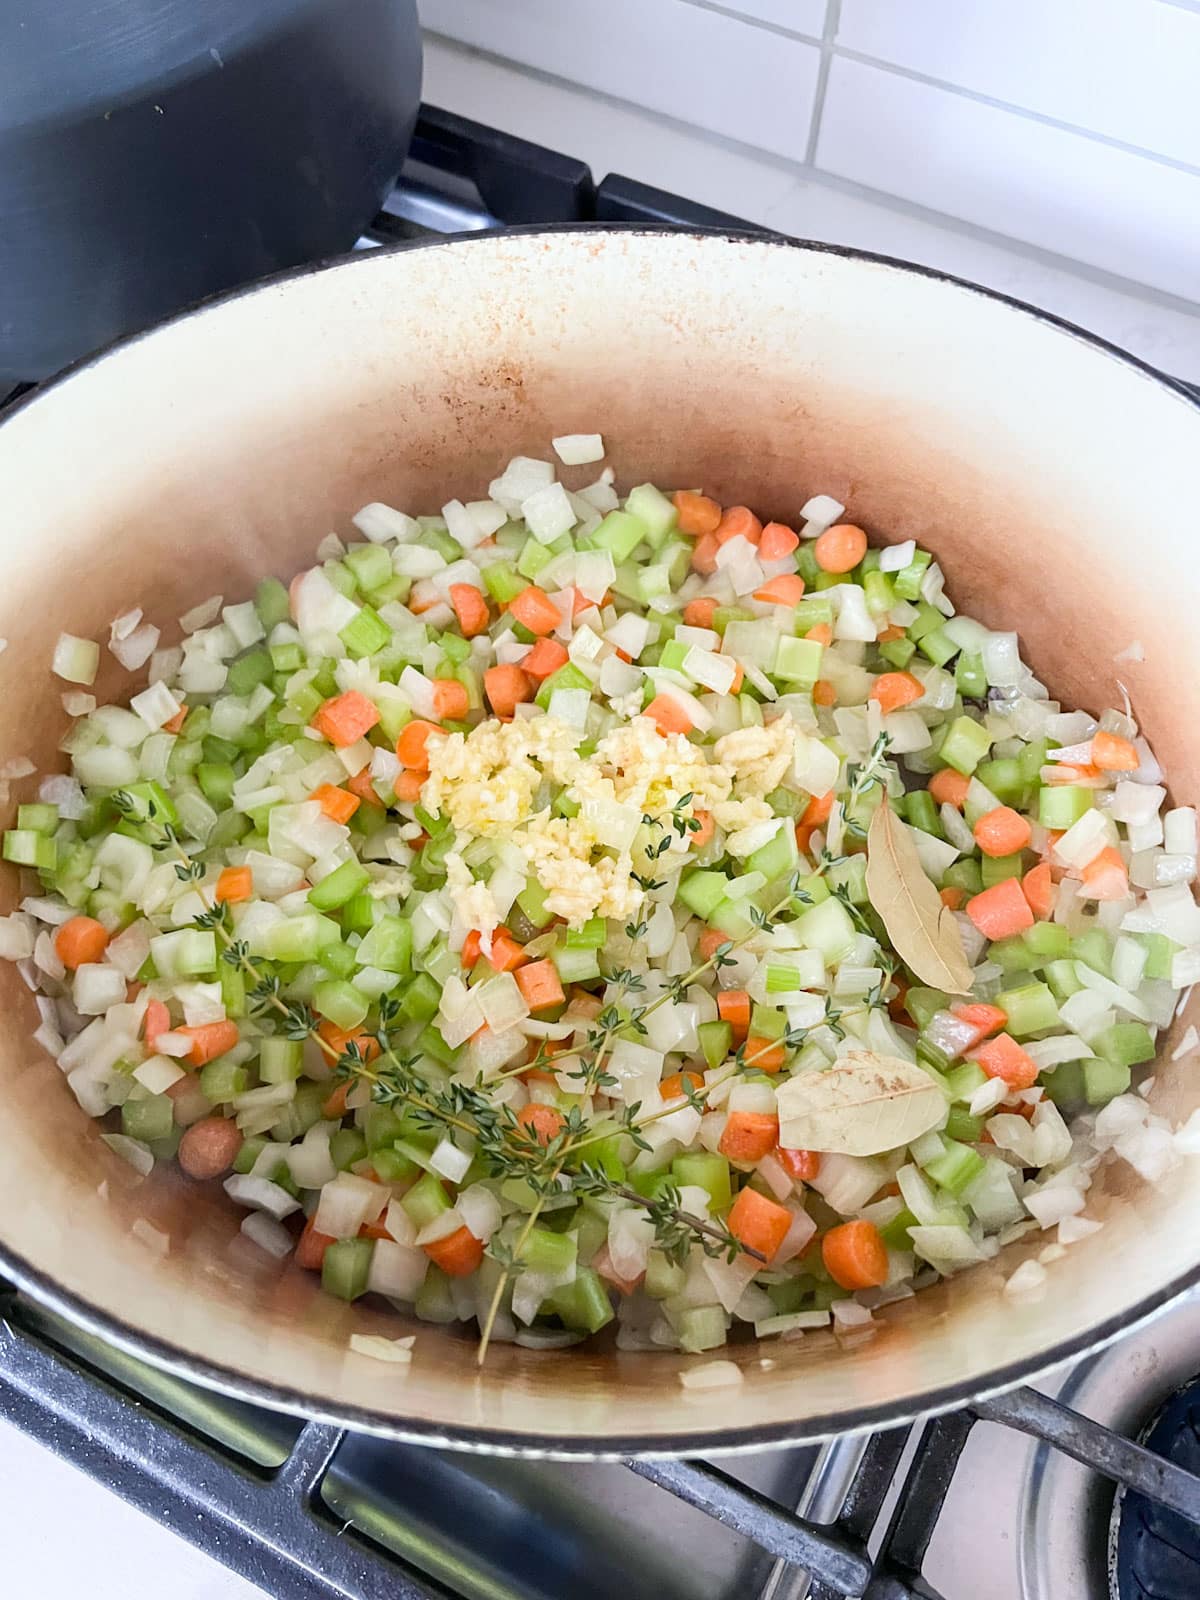 Veggies in a dutch oven cooking on a stove.